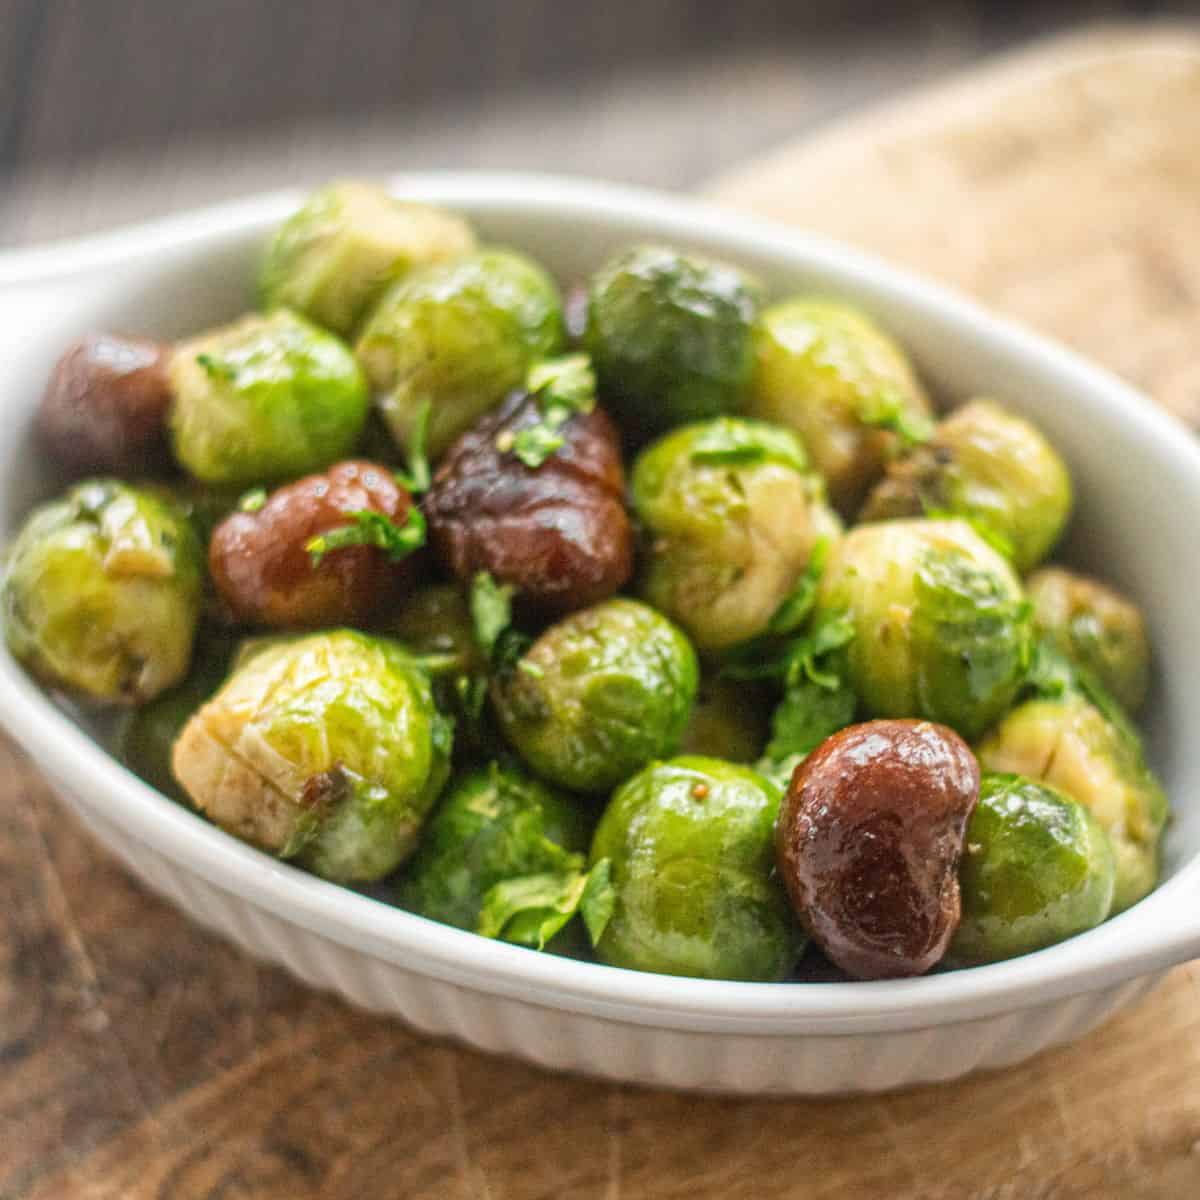 Braised Brussels Sprouts with Chestnuts